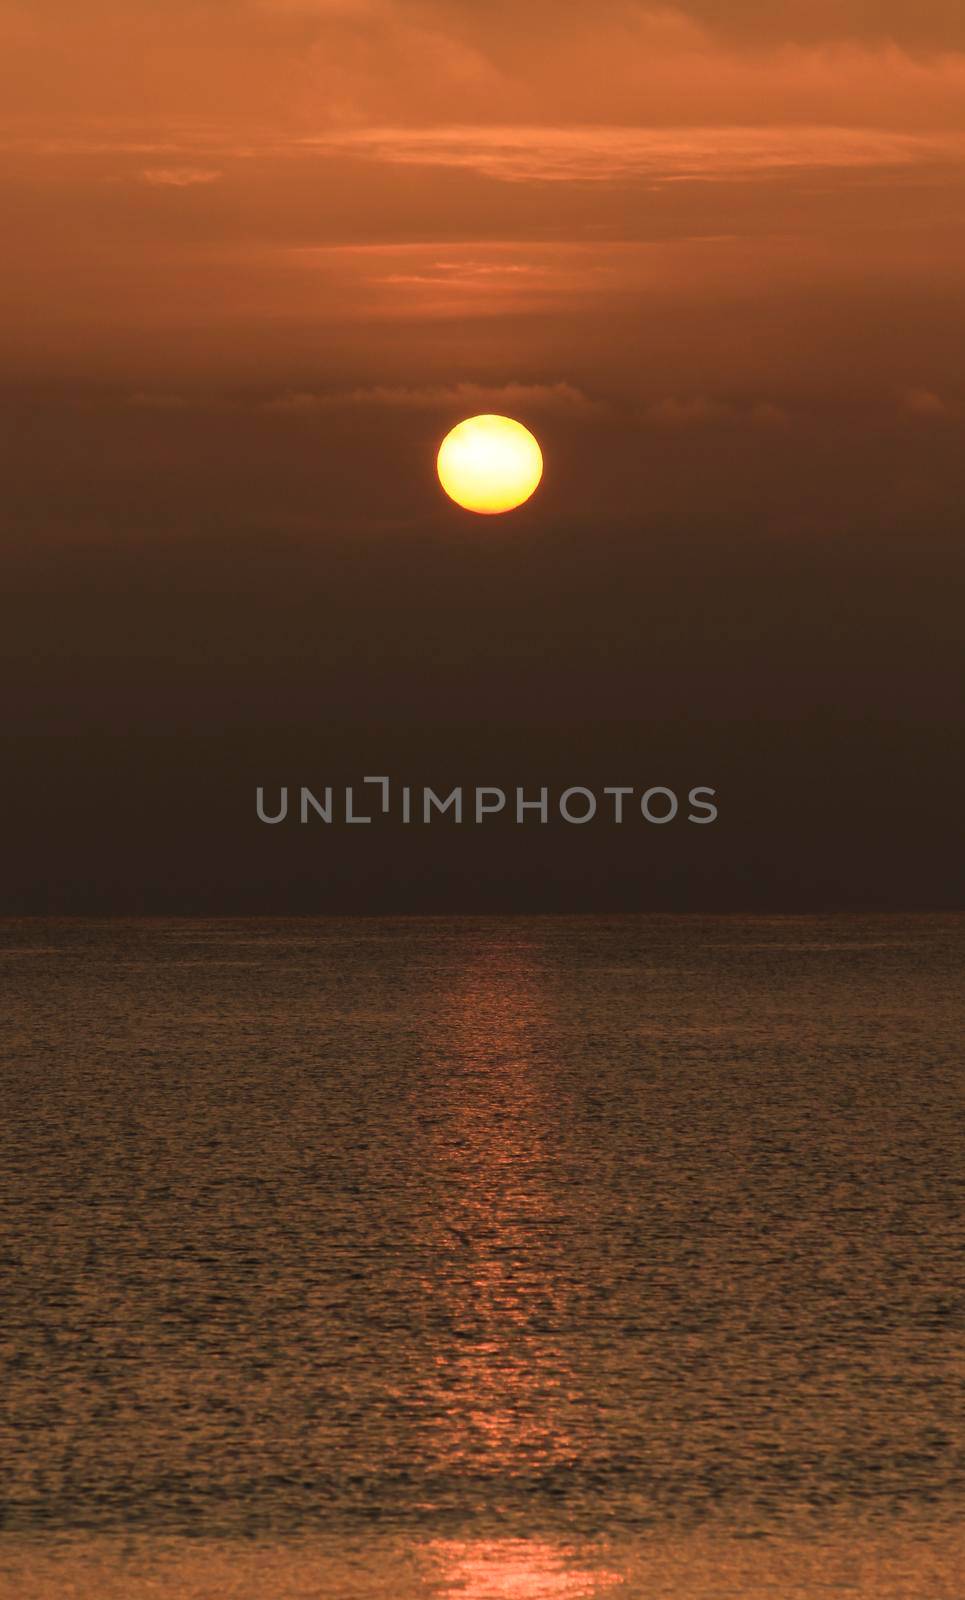 Colorful sun at sunrise over the mediterranean sea in southern Spain in Winter